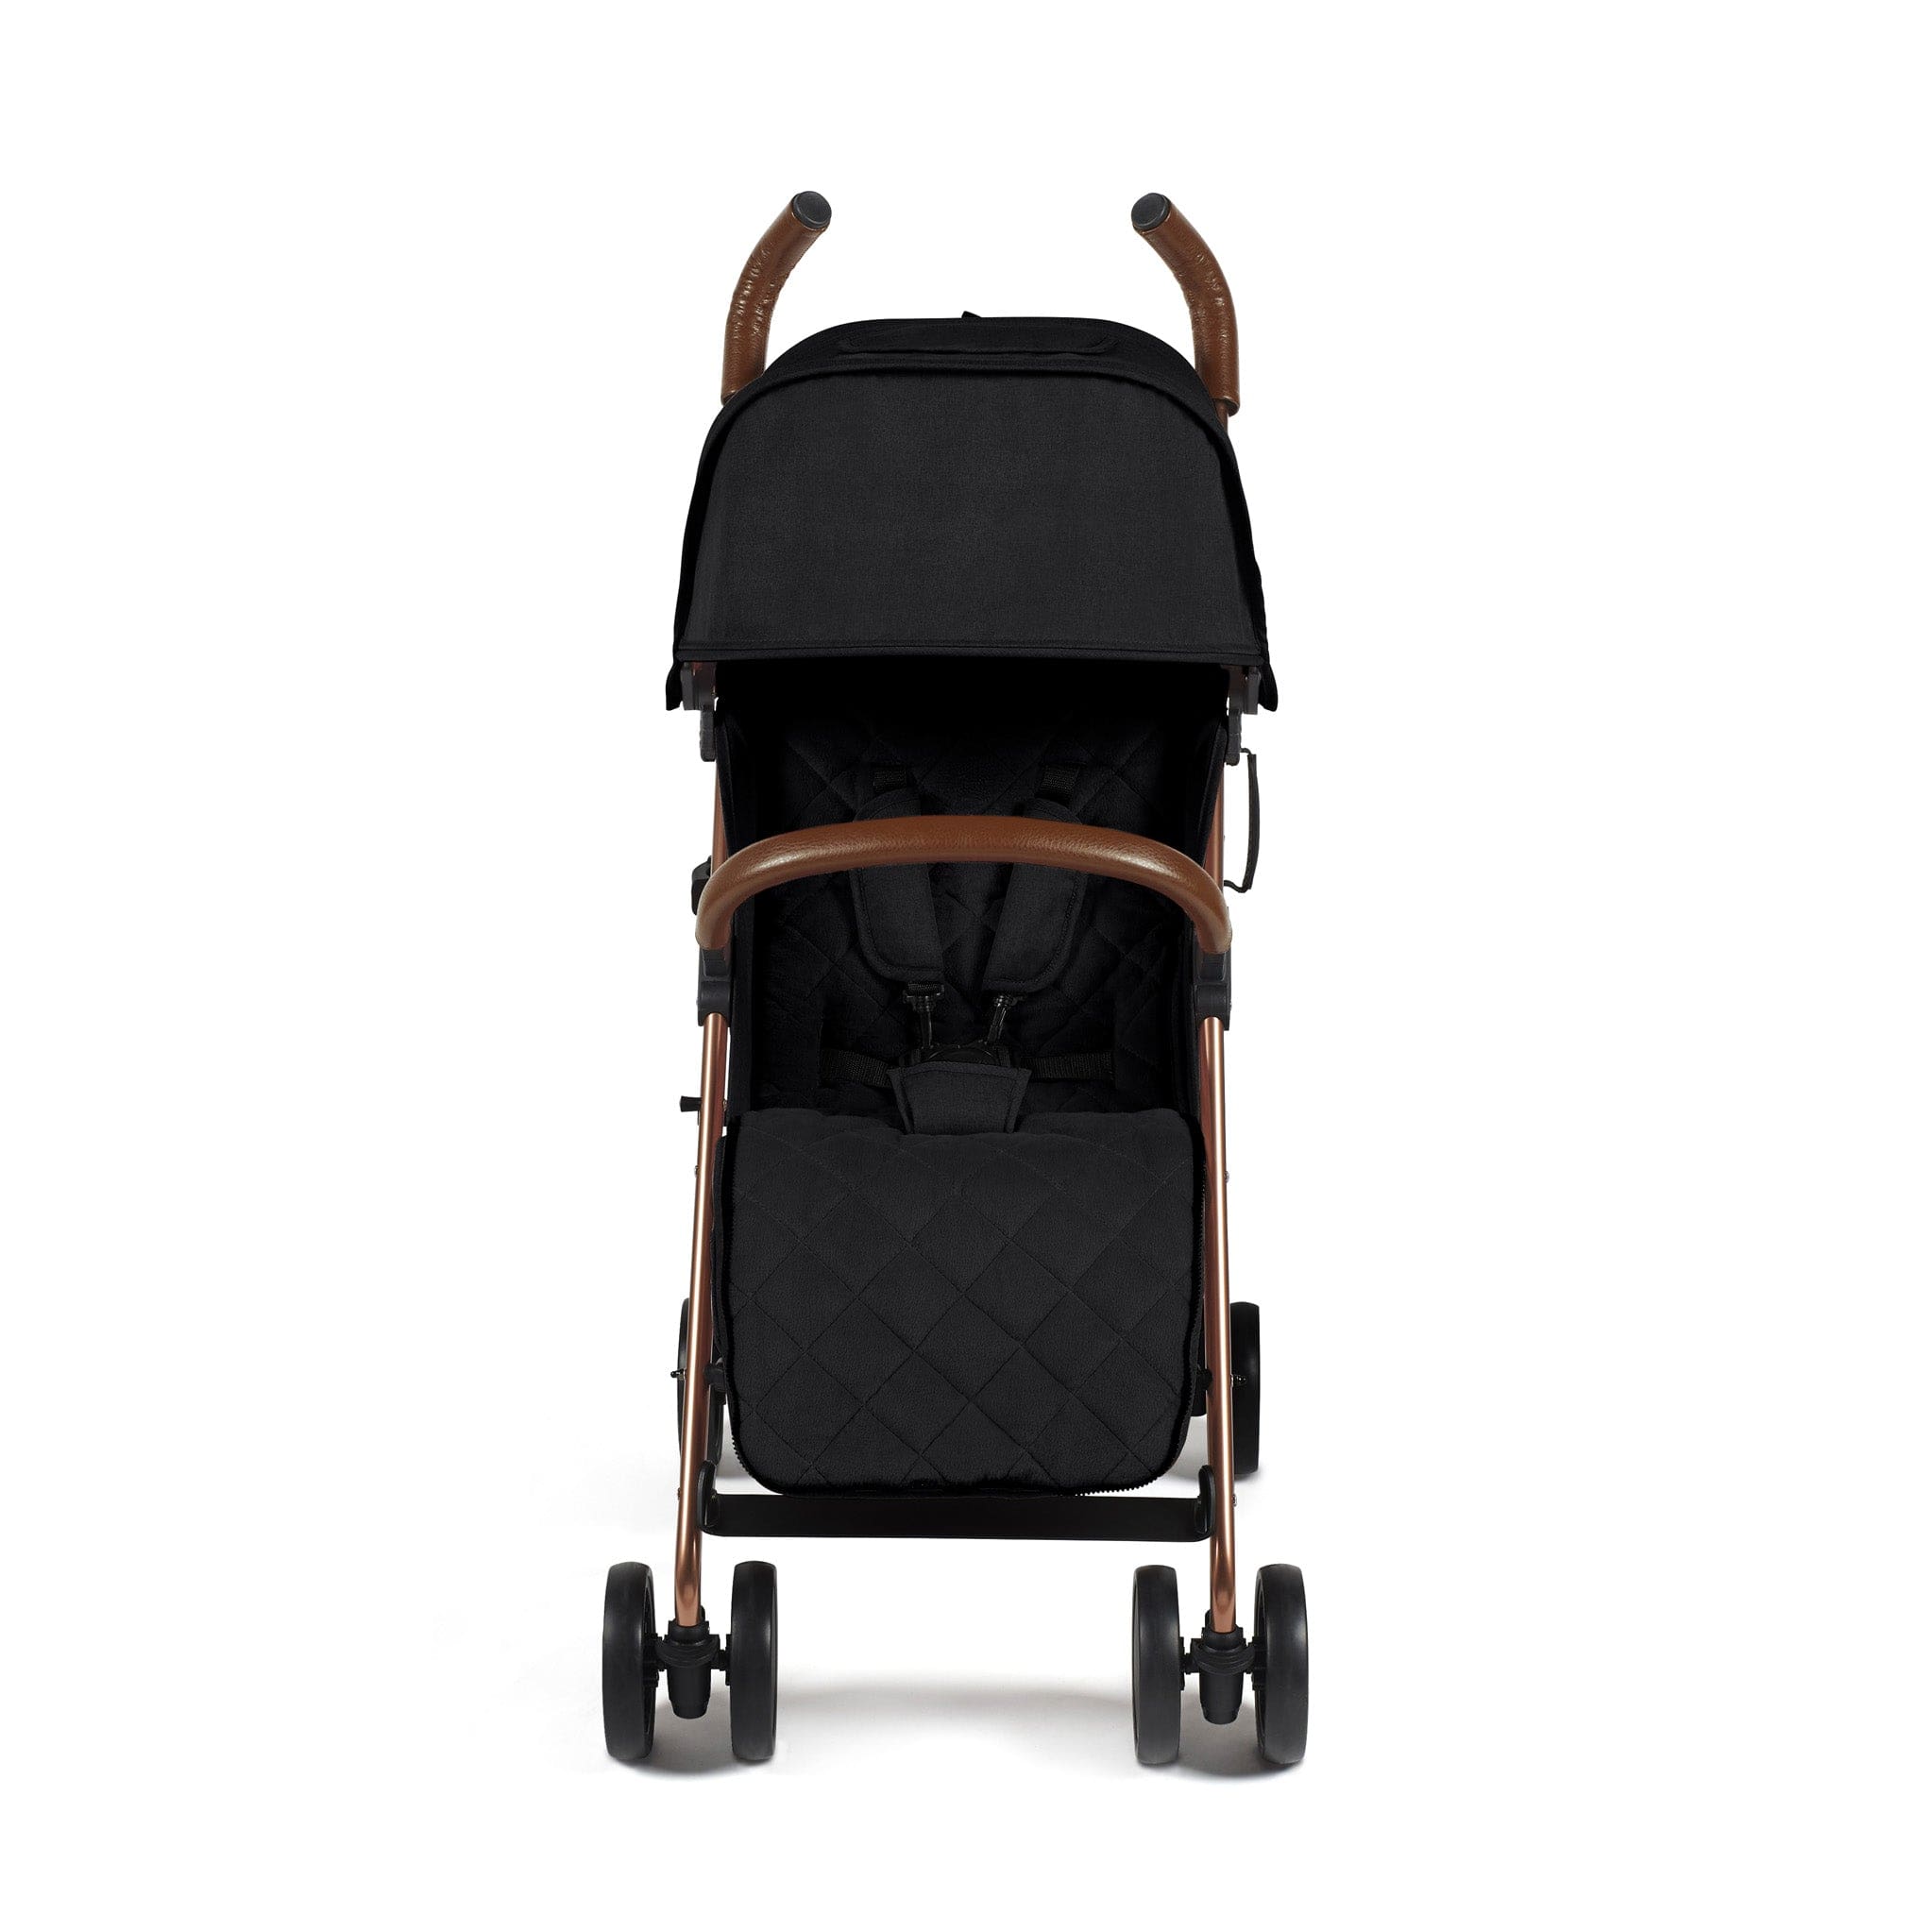 Ickle Bubba Discovery Prime Stroller Rose Gold/Black Pushchairs & Buggies 15-002-300-043 0700355999409